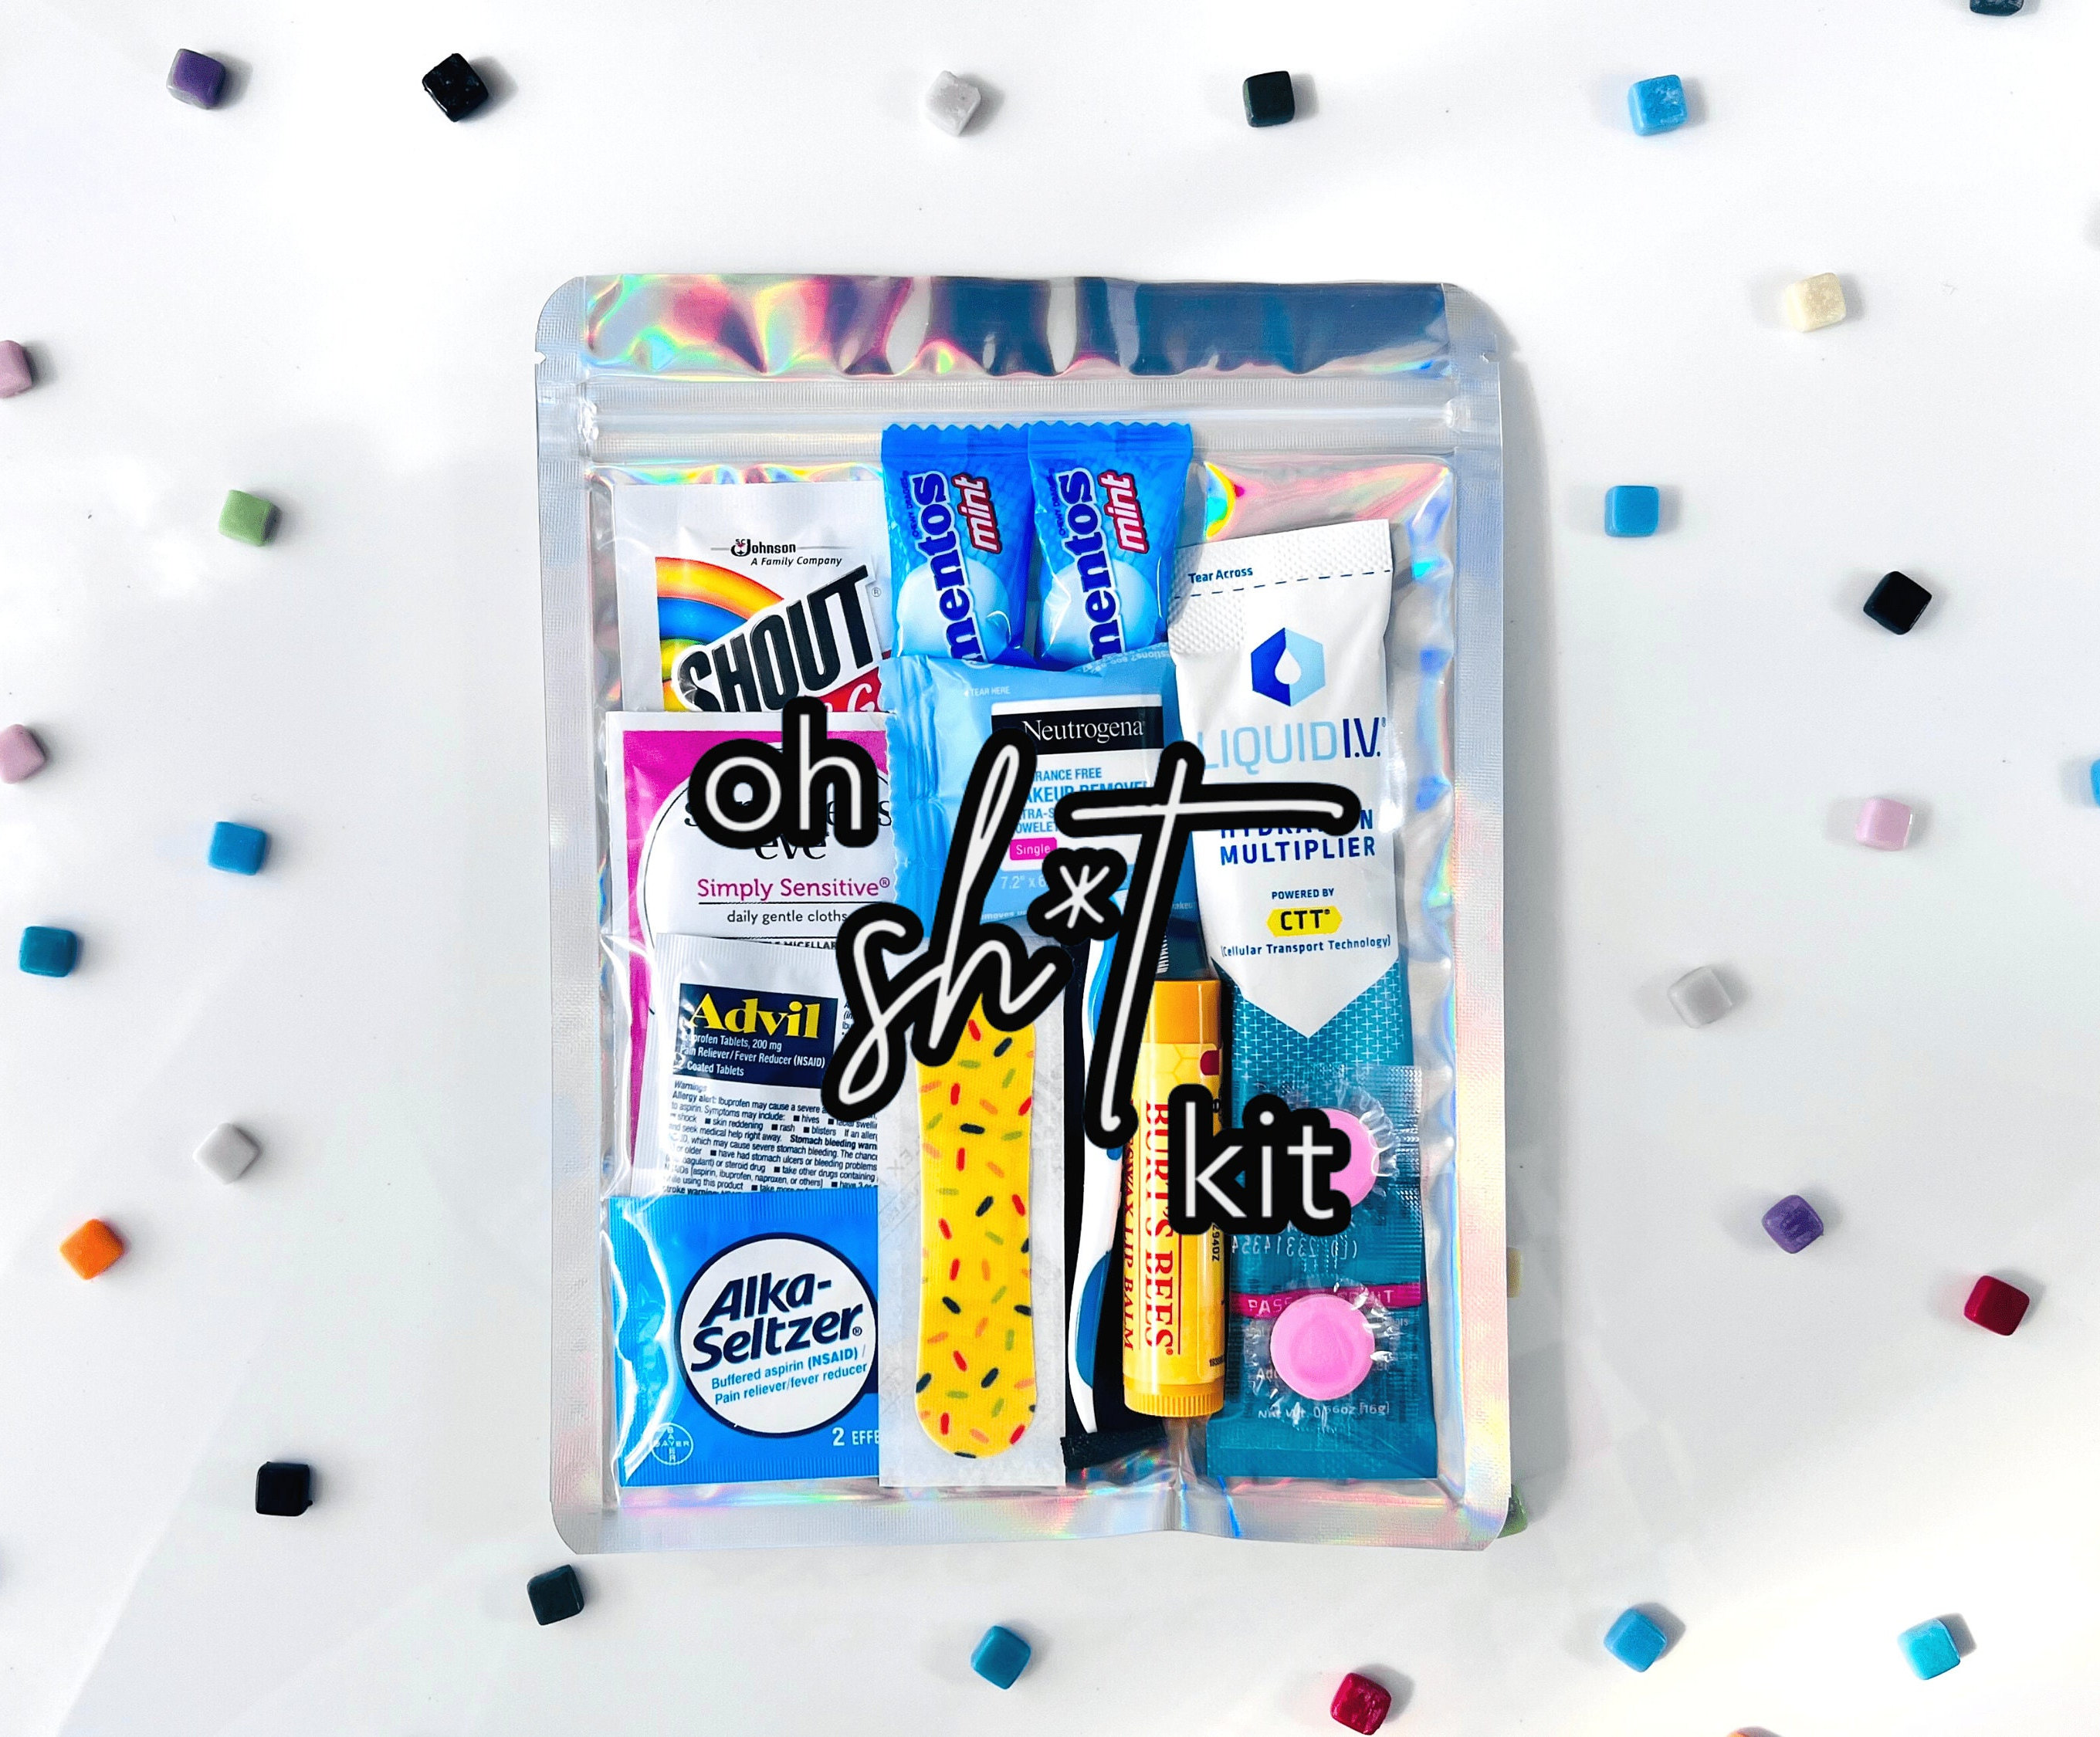 Travel Emergency Kit With Supplies Recovery Hangover Kit Adult Party Favors  Wedding Bachelorette Birthday FREE CUSTOMIZATION 